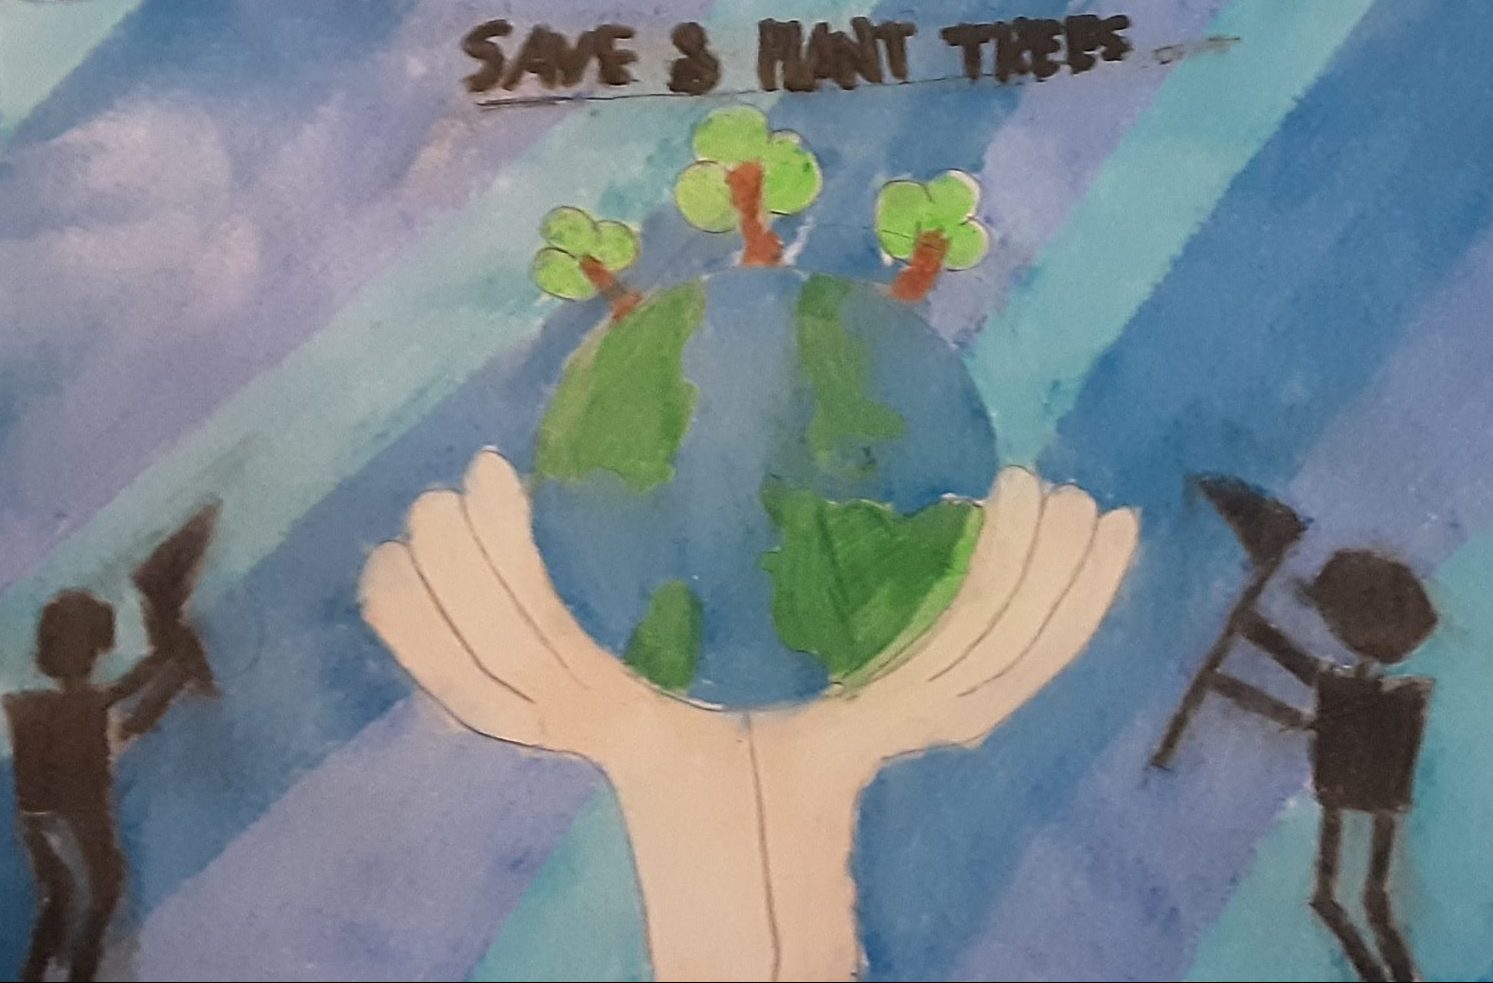 Save and plant trees - Kids Care About Climate Change 2021